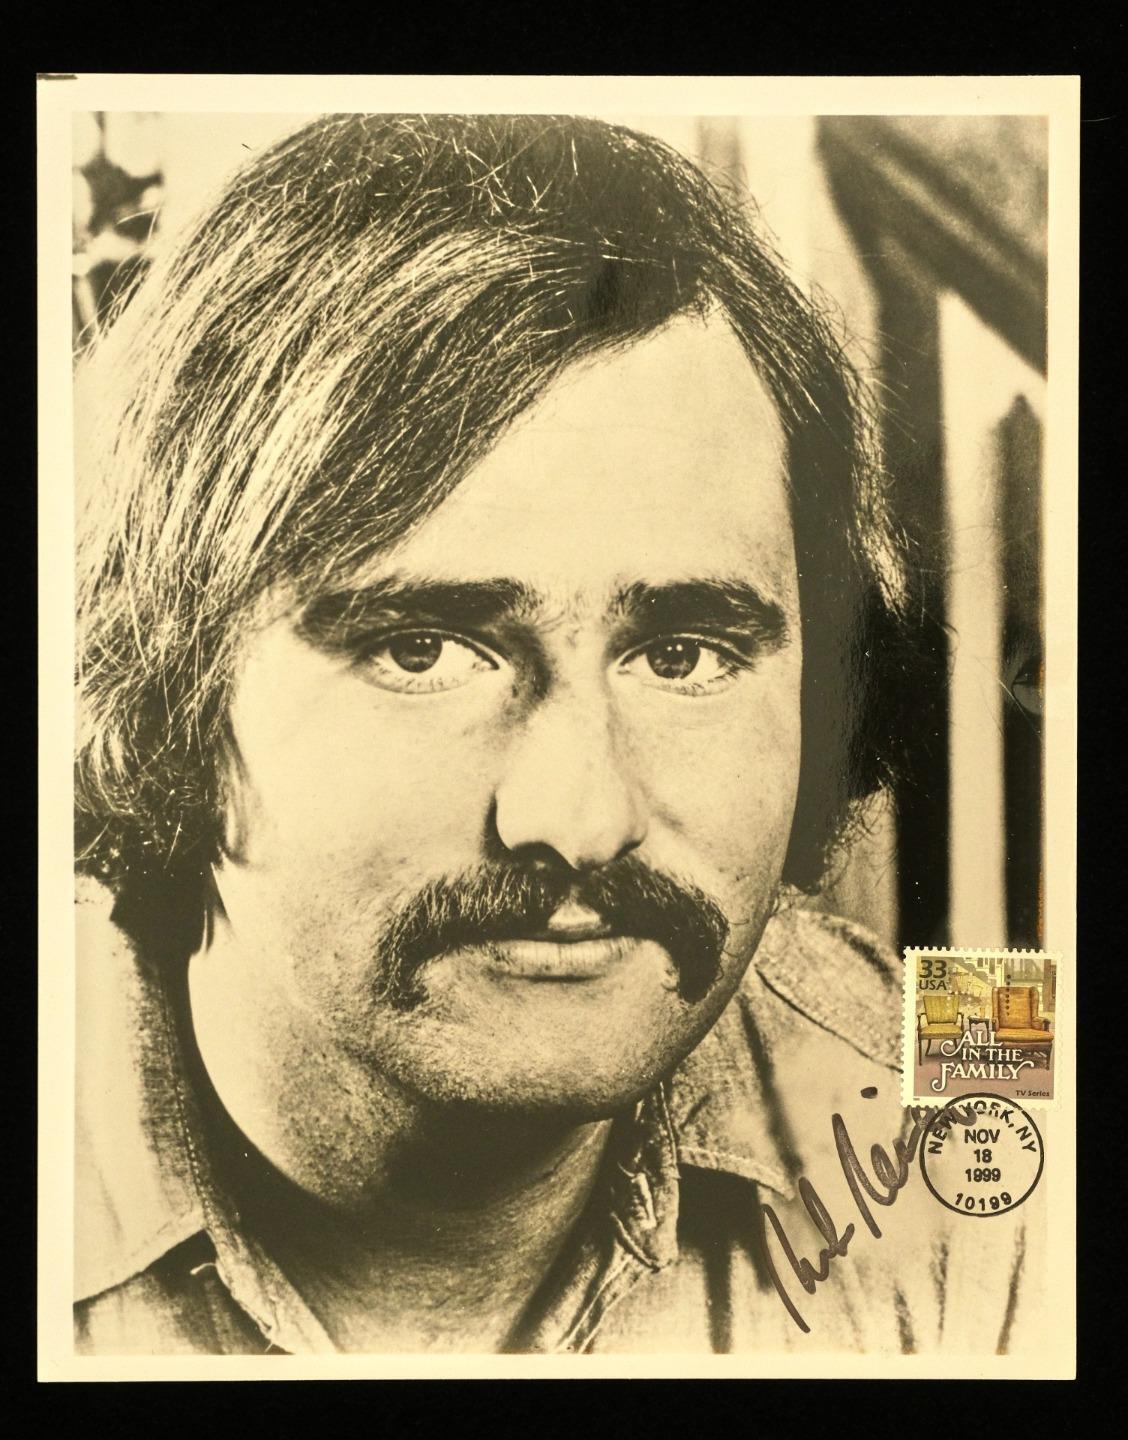 Young Rob Reiner Signed/Autographed American Actor